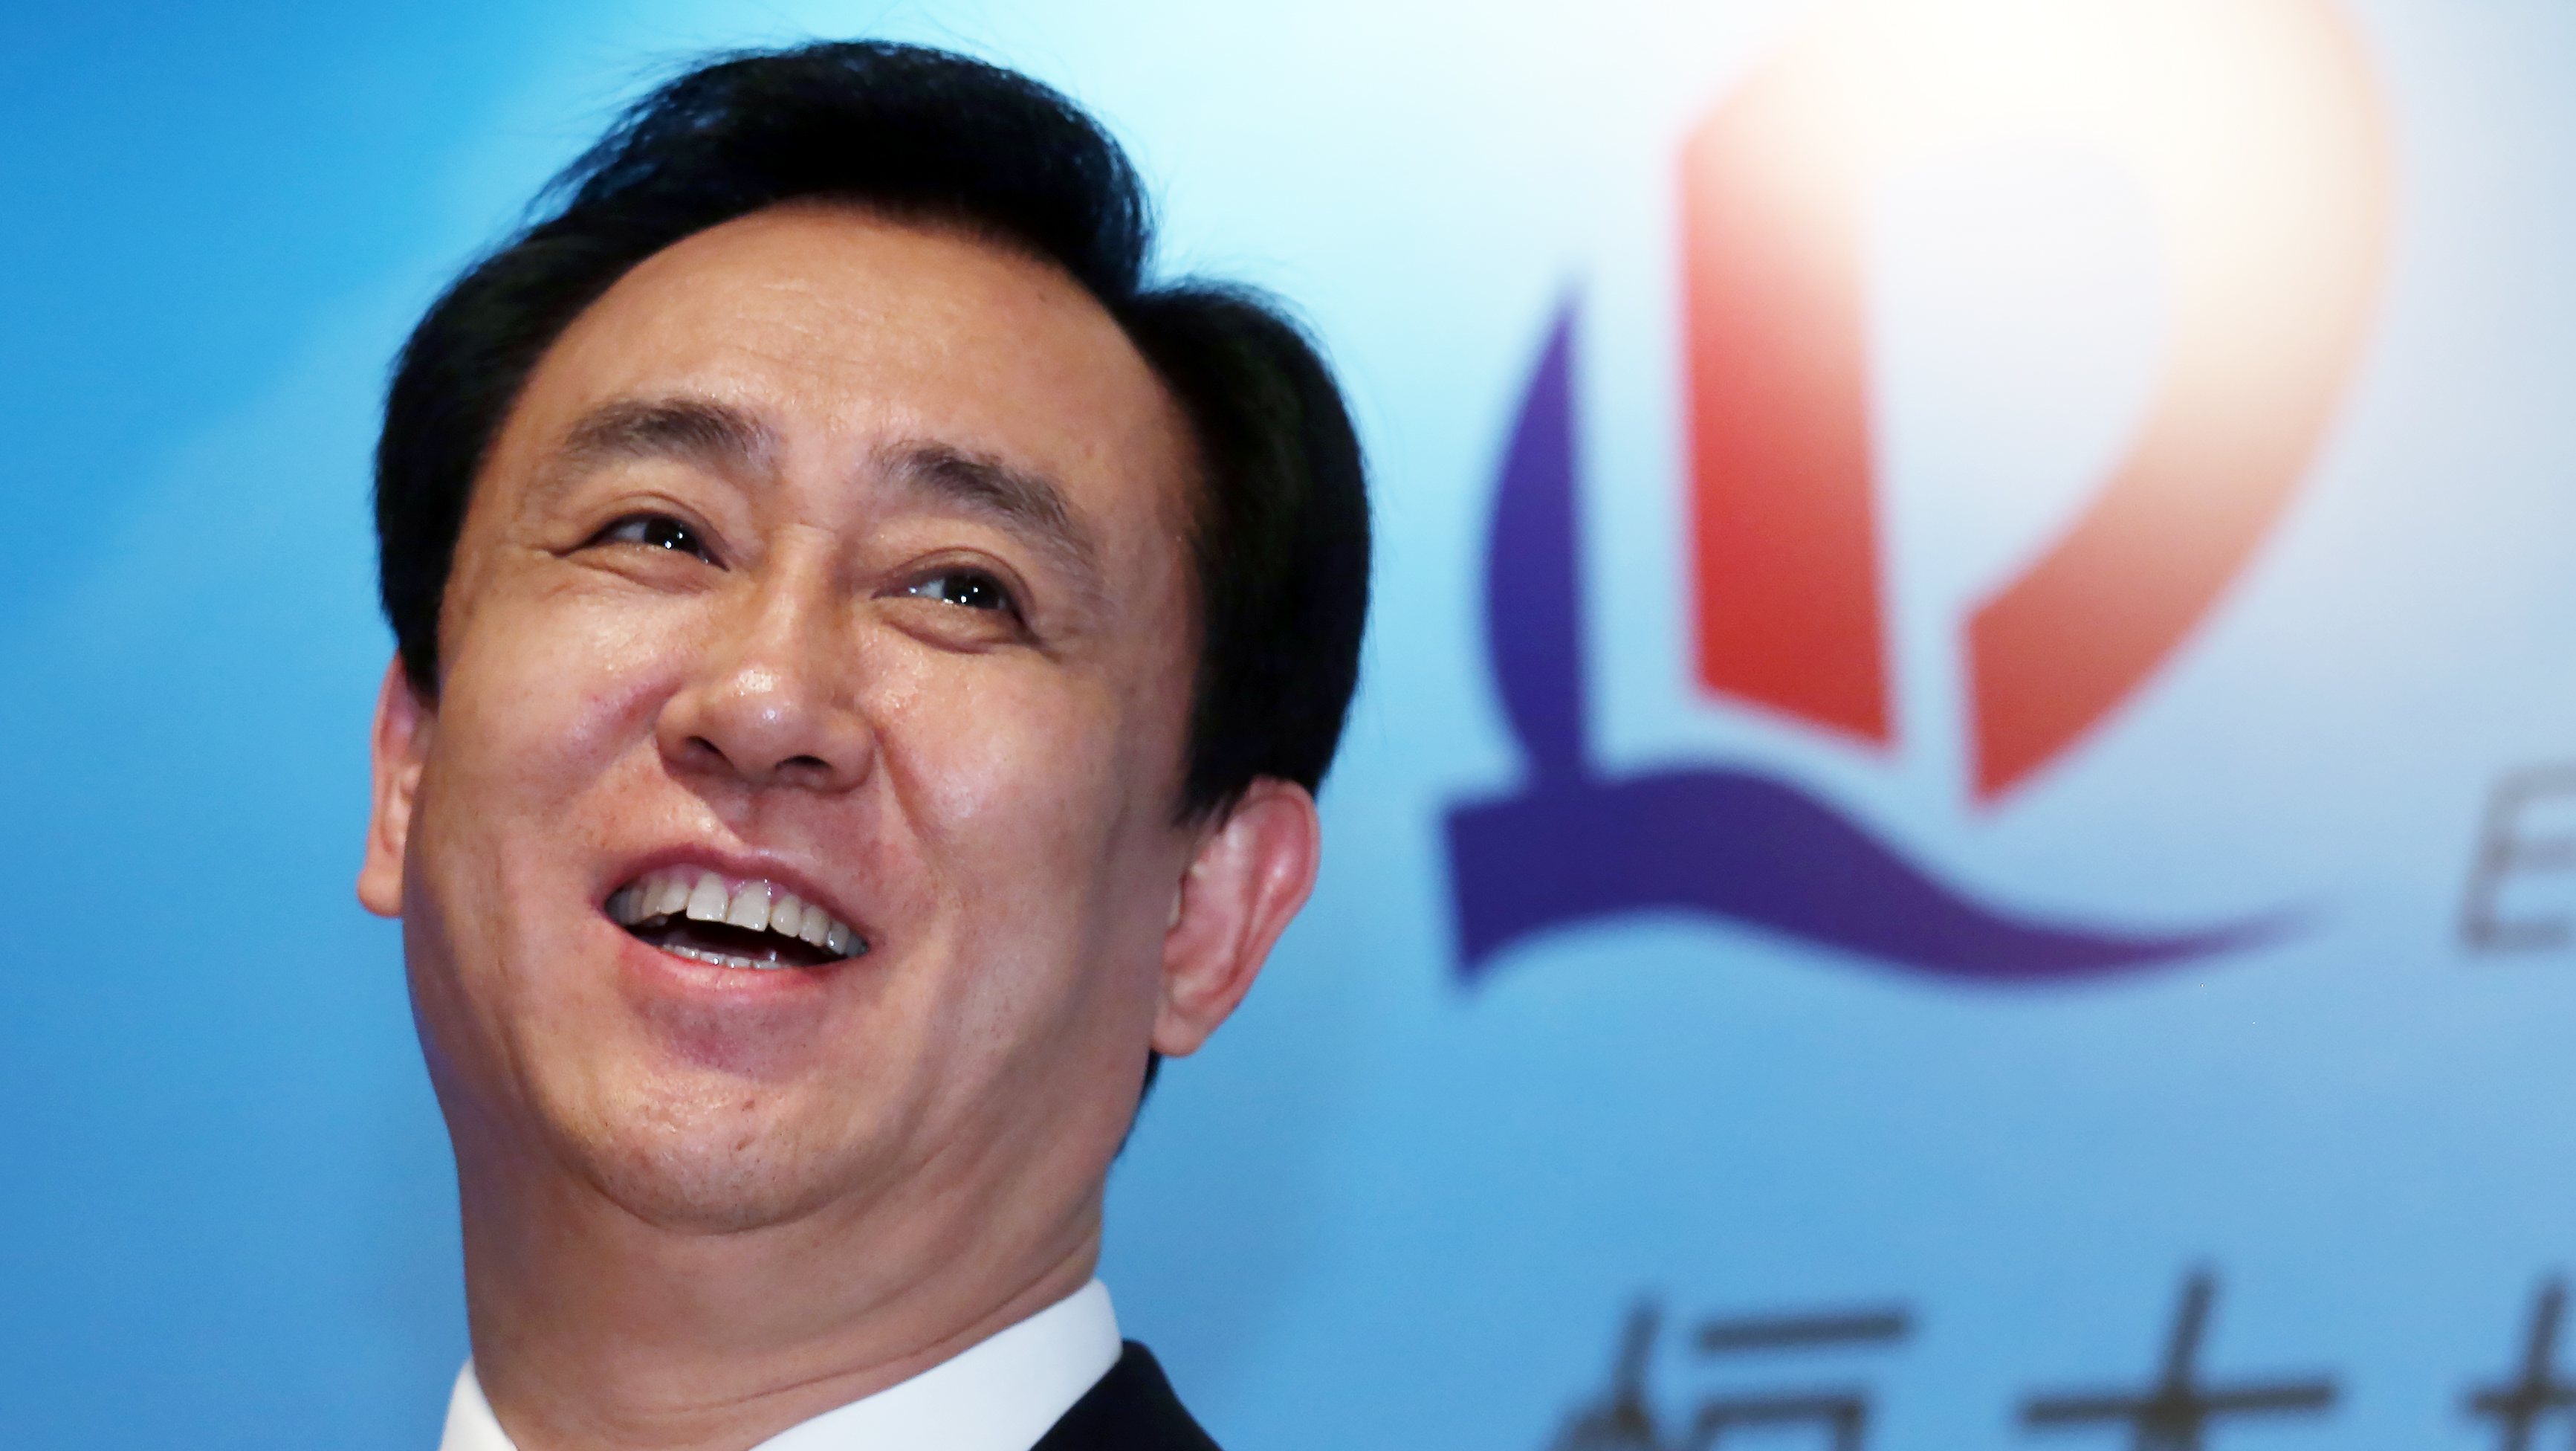 Evergrande Real Estate Group Chairman of the Board Hui Ka-yan attends Evergrande Real Estate result announcement at the JW Marriott in Admiralty. 29MAR16 SCMP/ Nora Tam